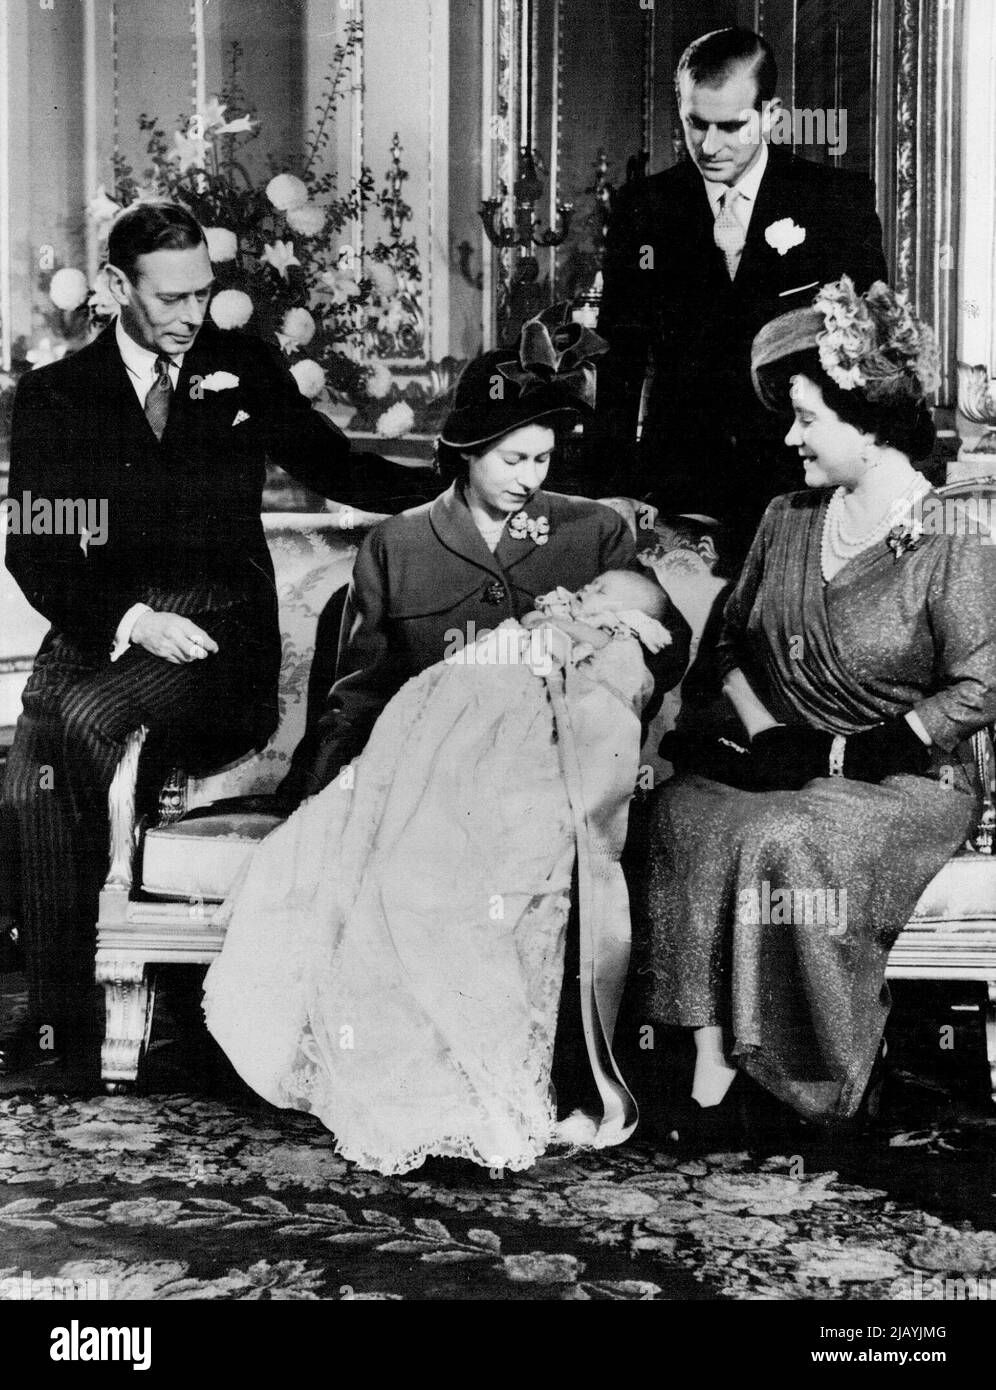 Royal Baby Christened At Buckingham Palace : First Picture of Princess Elizabeth With Son. The first picture of the baby Prince Charles - and the King since his illness - taken at Buckingham Palace. The King is seen seated at left with the Duke of Edinburgh (Standing) Princess Elizabeth (holding baby Prince Charles) and the Queen Elizabeth. All are admiring the young Prince. Prince Charles, baby son of Princess Elizabeth and the Duke of Edinburgh was christened at Buckingham Palace, the Archbishop of Canterbury Dr Geoffrey Fisher, officiating. The baby was named Charles Philip Arthur George an Stock Photo